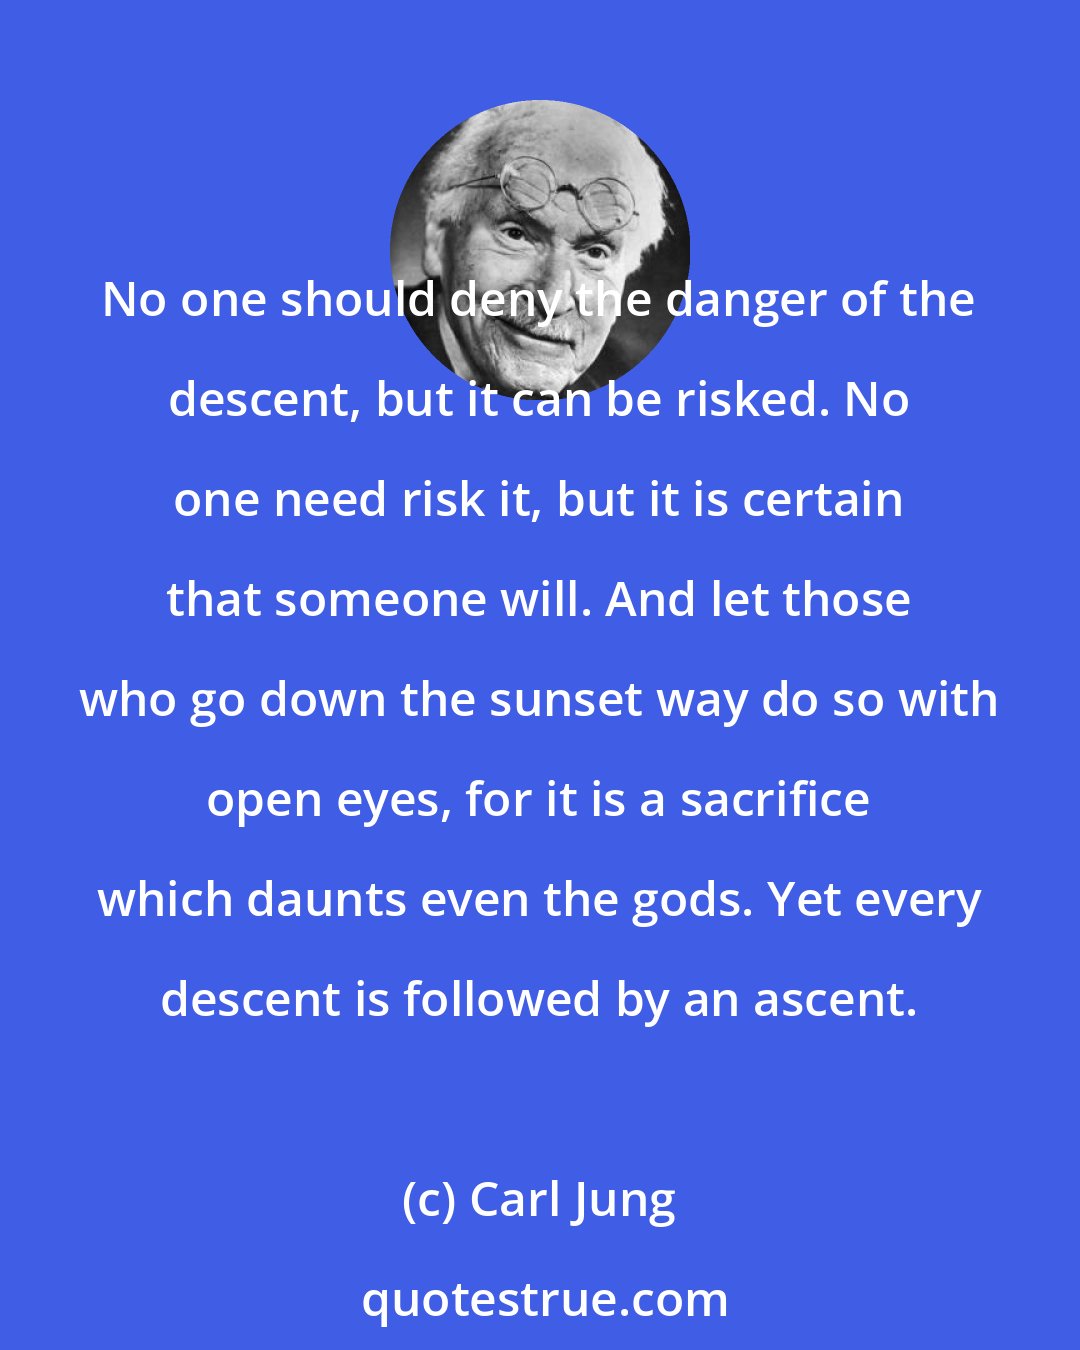 Carl Jung: No one should deny the danger of the descent, but it can be risked. No one need risk it, but it is certain that someone will. And let those who go down the sunset way do so with open eyes, for it is a sacrifice which daunts even the gods. Yet every descent is followed by an ascent.